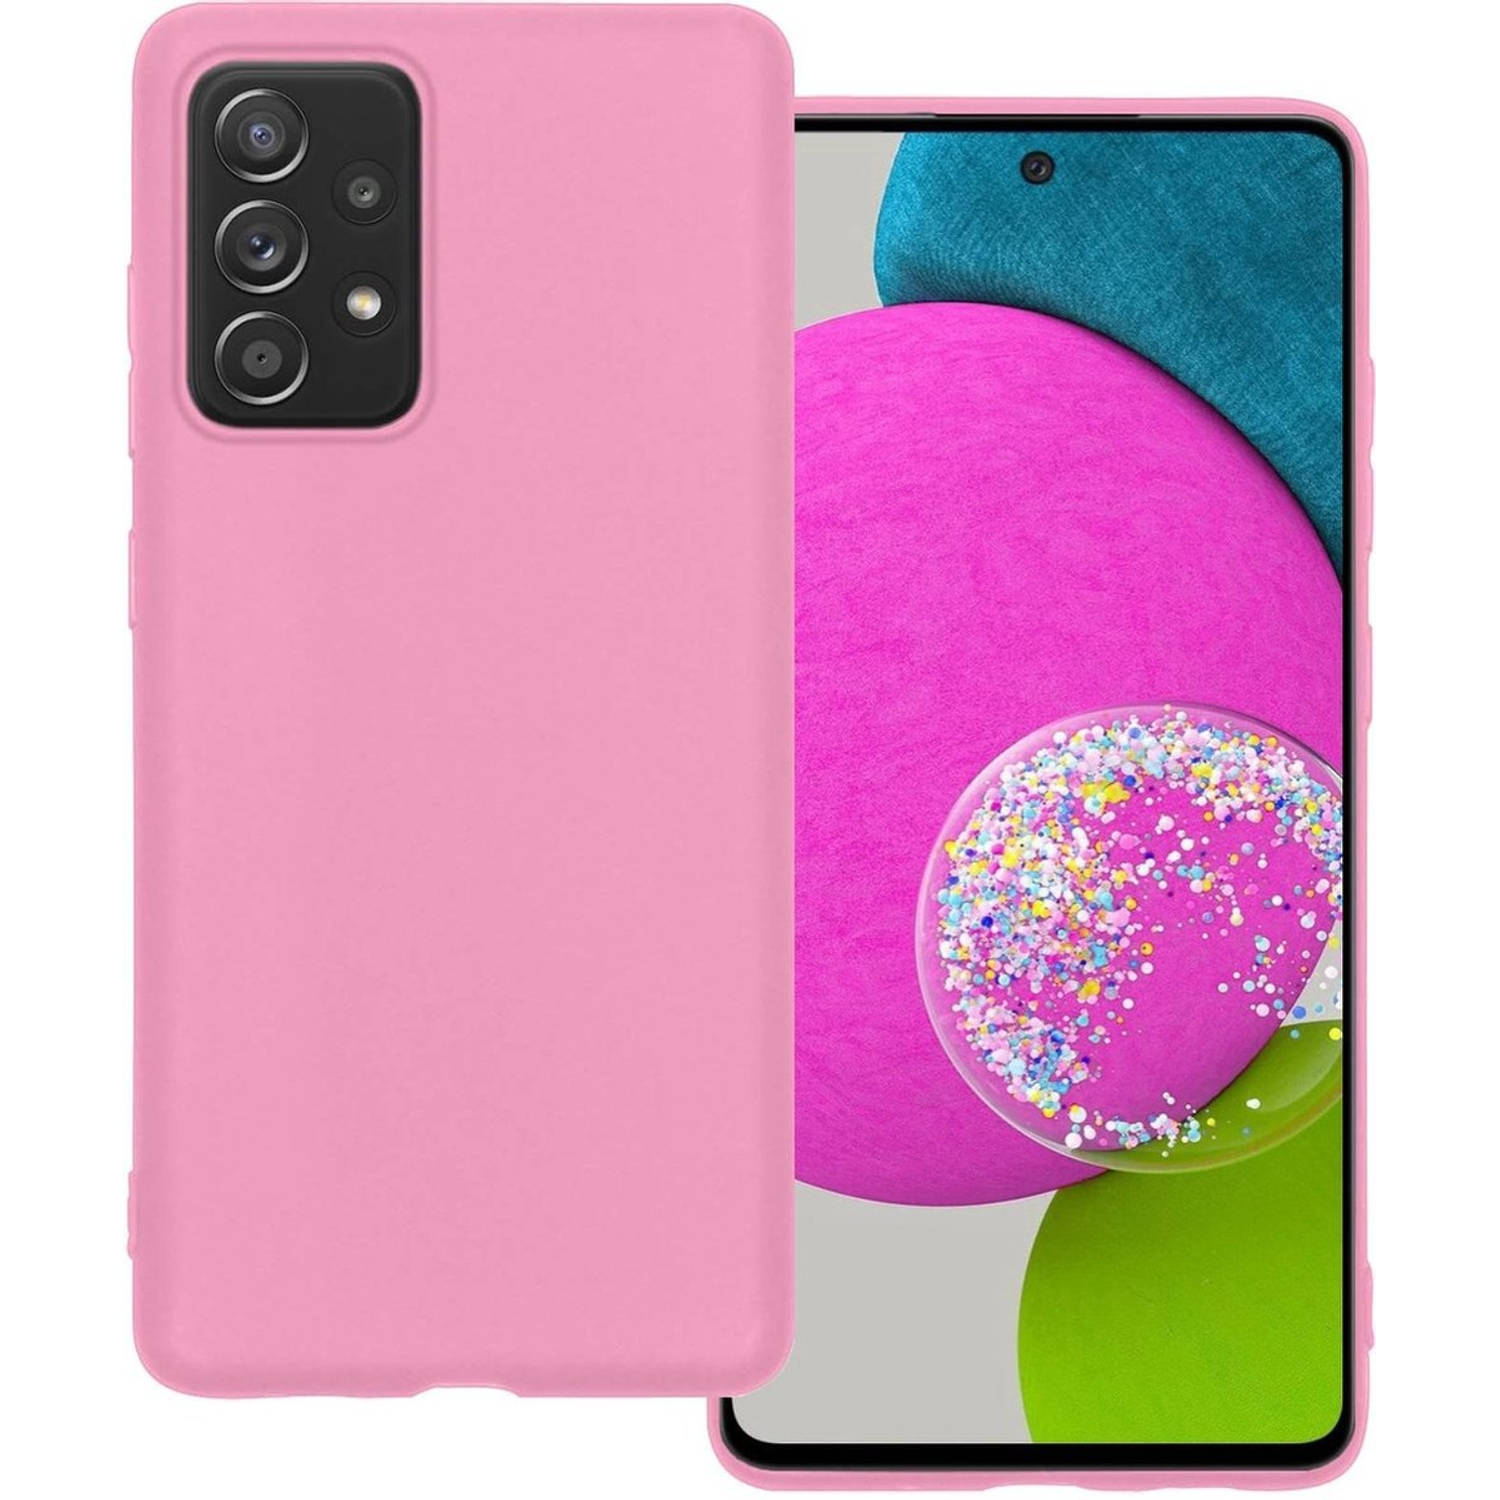 Basey Samsung Galaxy A52 Hoesje Siliconen Hoes Case Cover -Roze